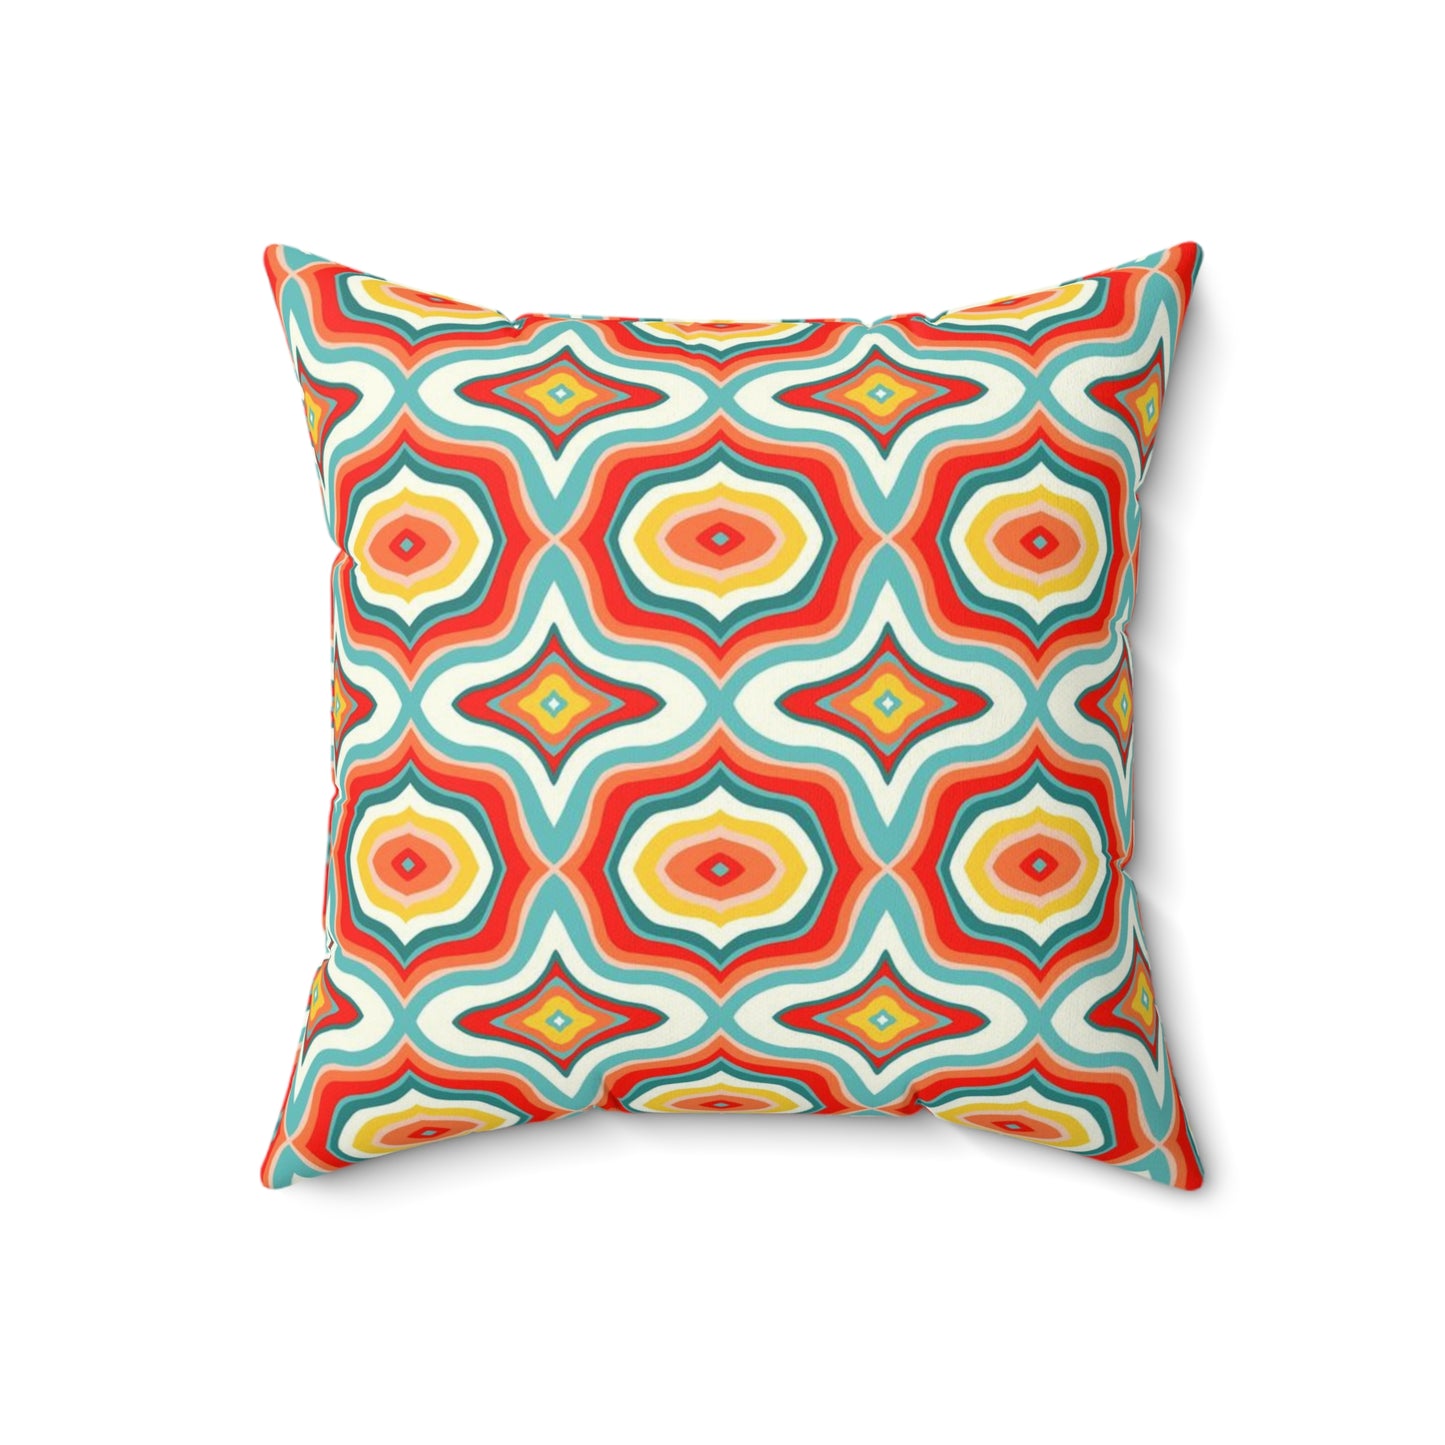 Groovy Waves Spun Polyester Square Pillow